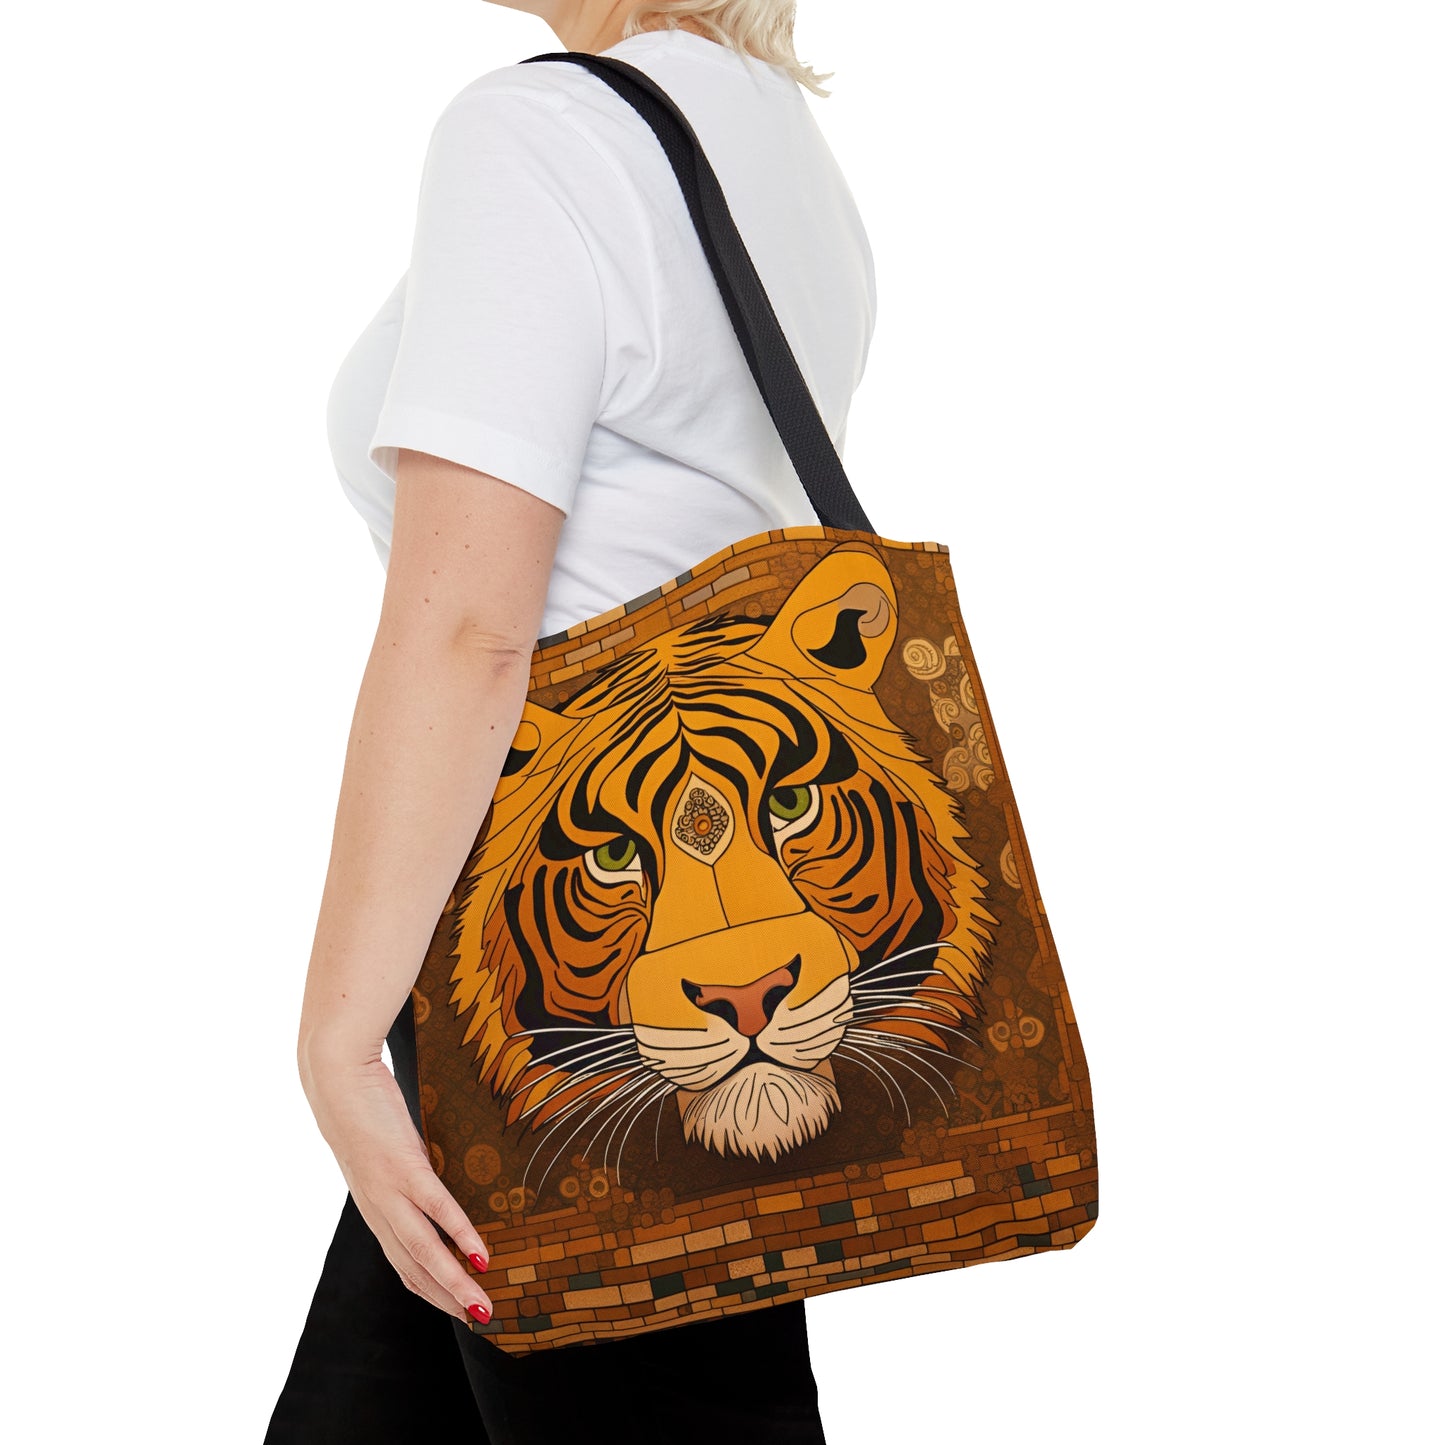 Tiger Head in the Style of Gustav Klimt Printed on Tote Bag medium with female model